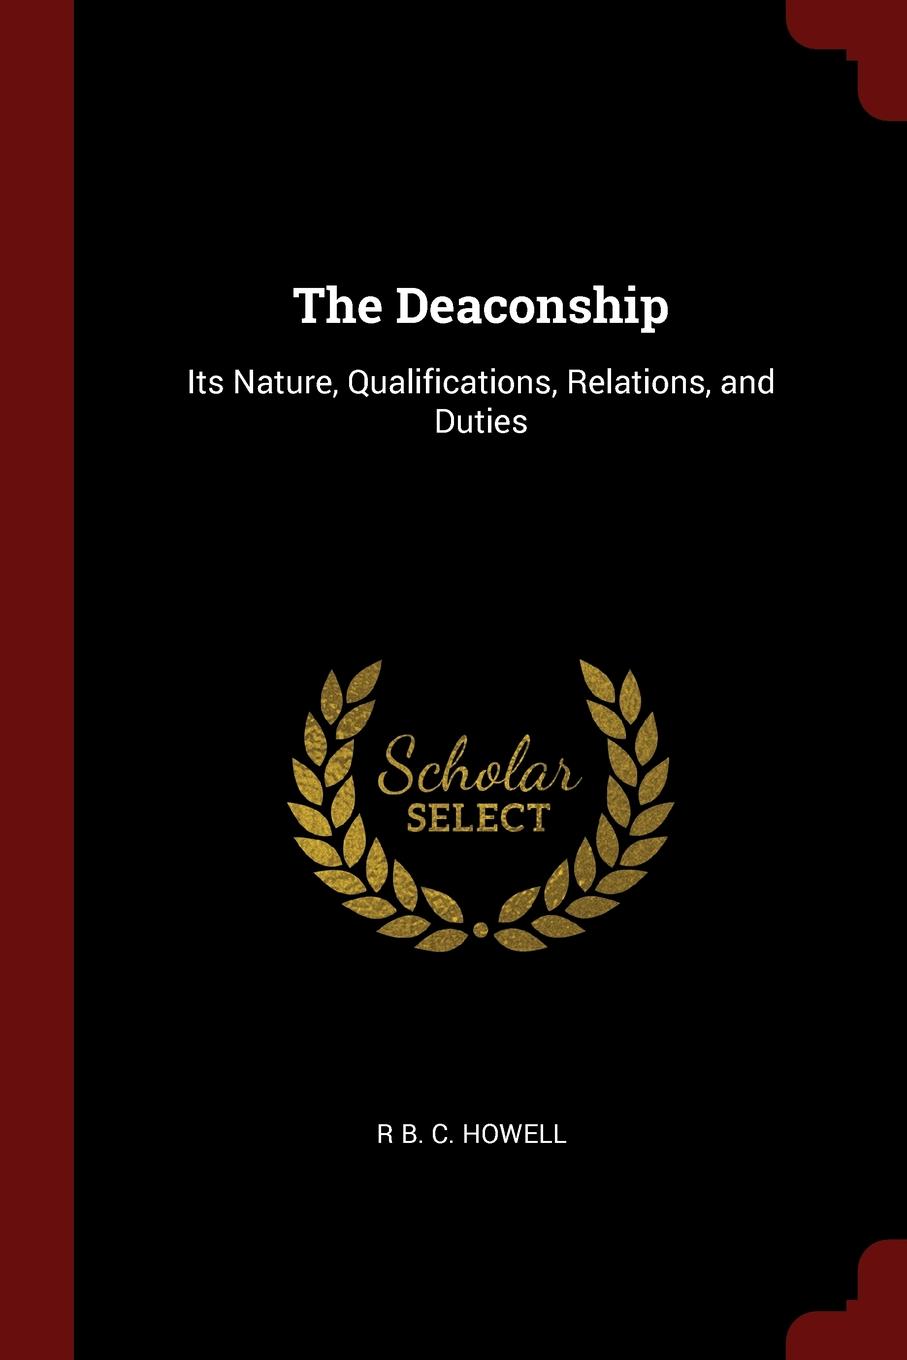 The Deaconship. Its Nature, Qualifications, Relations, and Duties